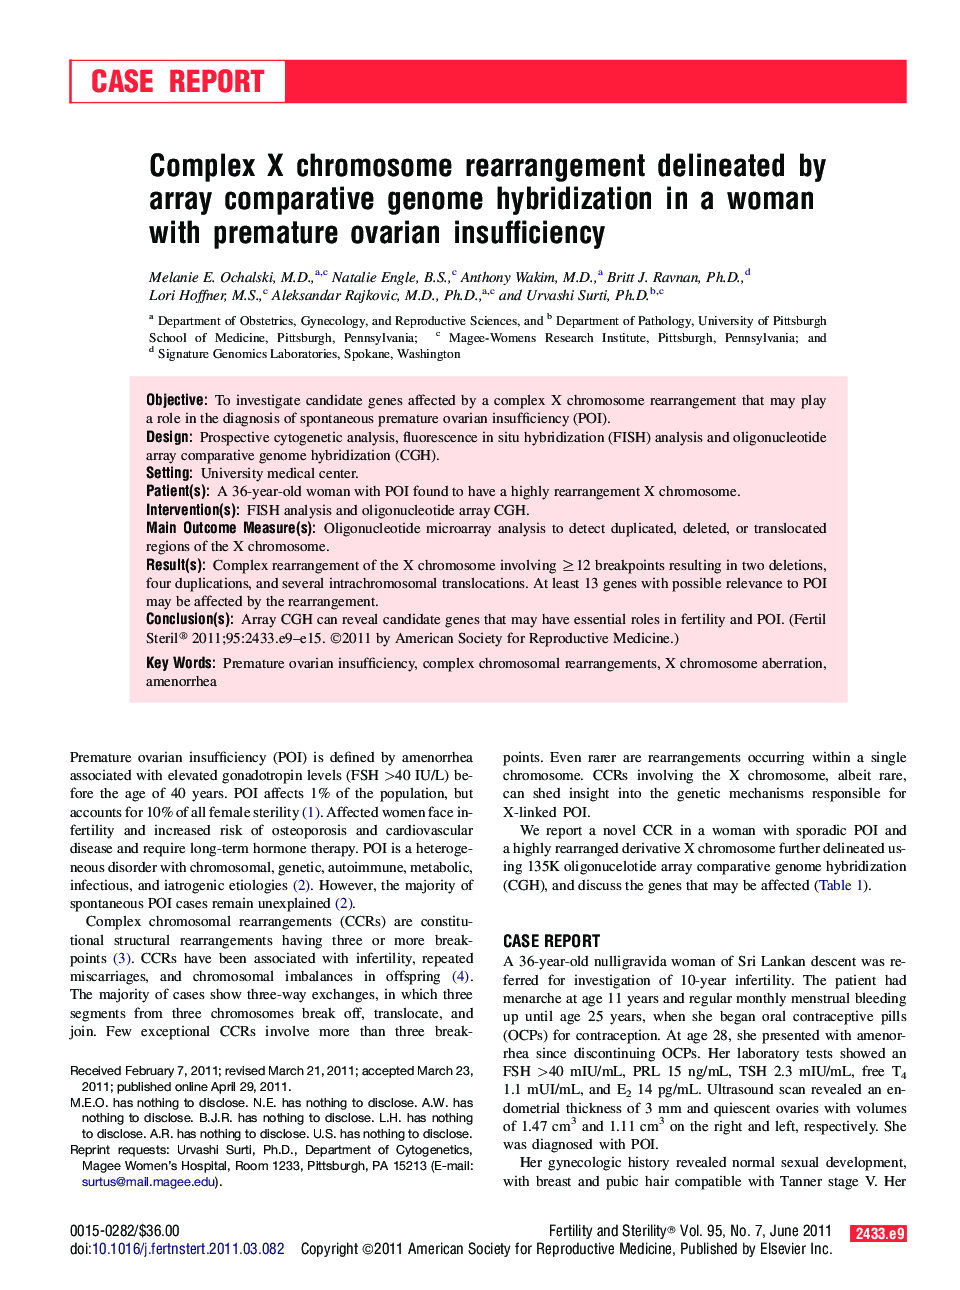 Complex X chromosome rearrangement delineated by array comparative genome hybridization in a woman with premature ovarian insufficiency